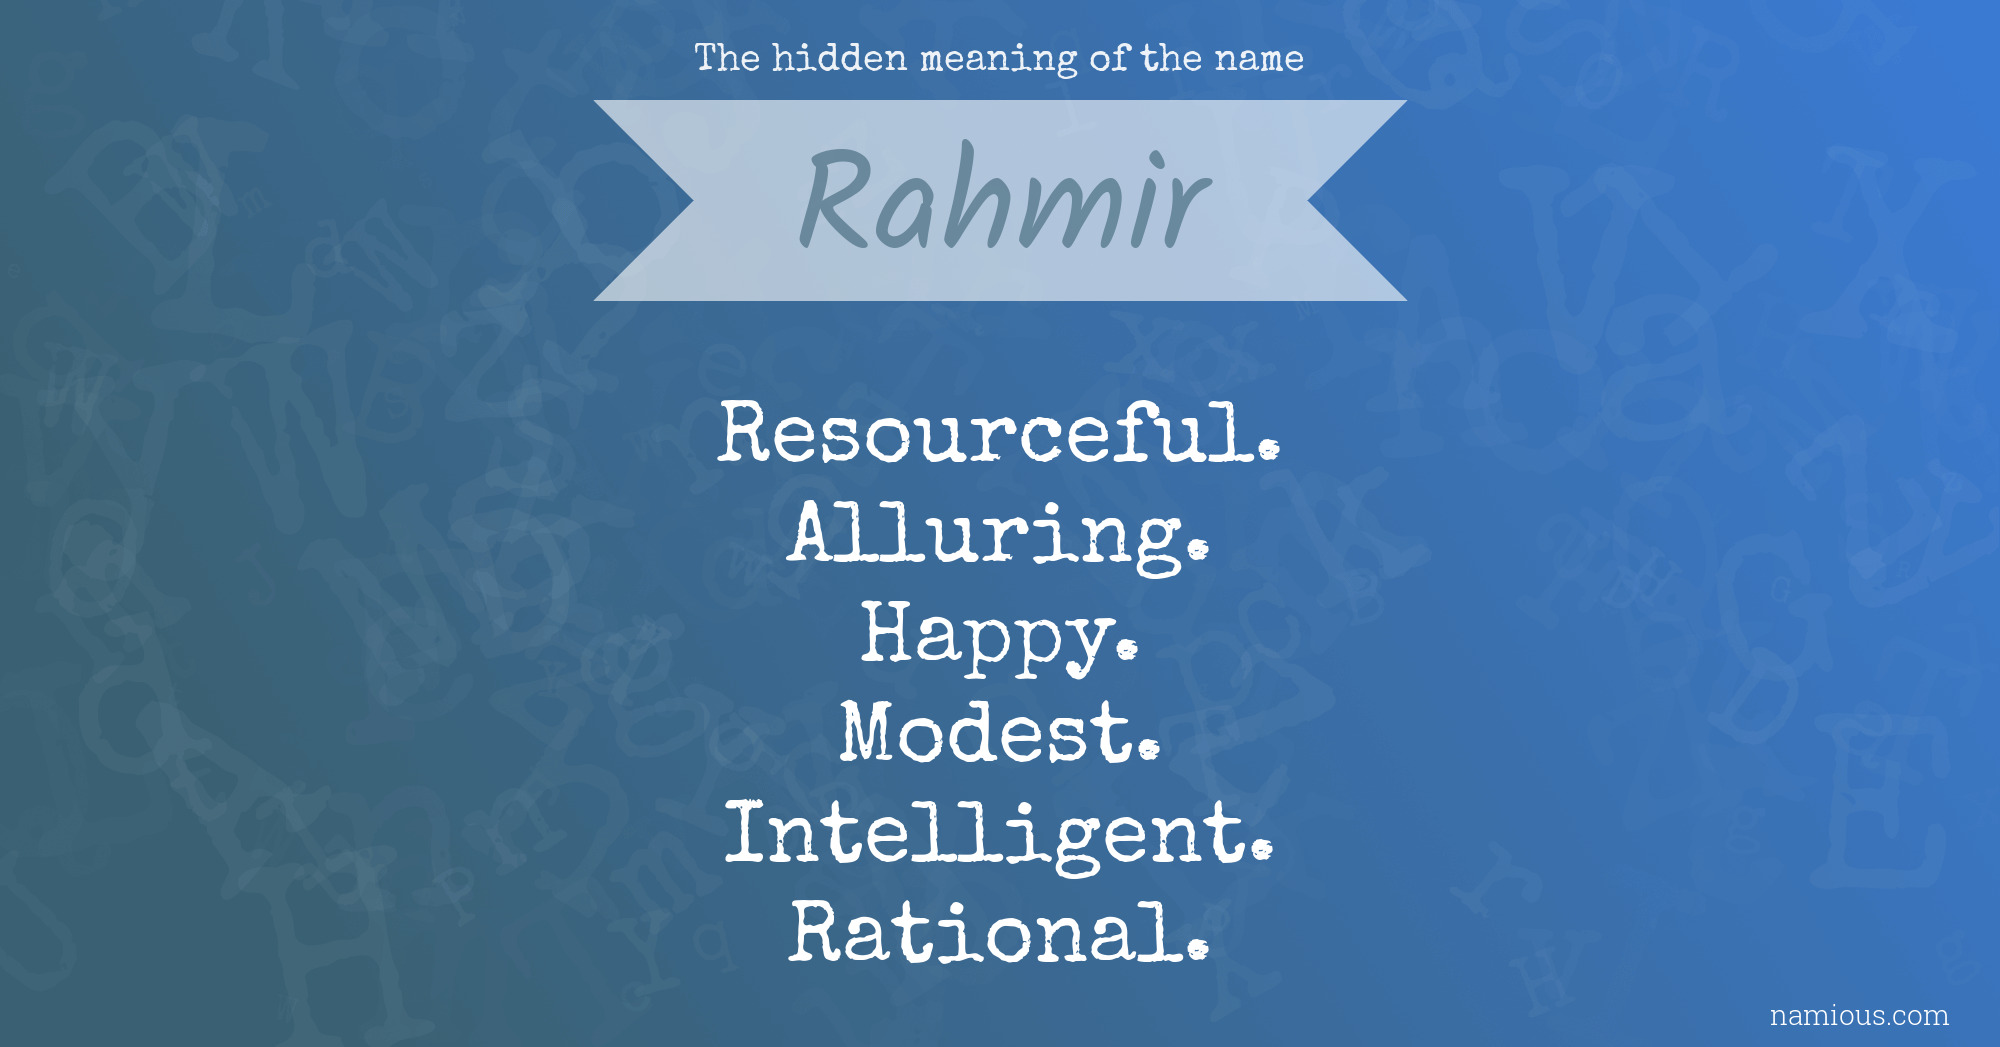 The hidden meaning of the name Rahmir